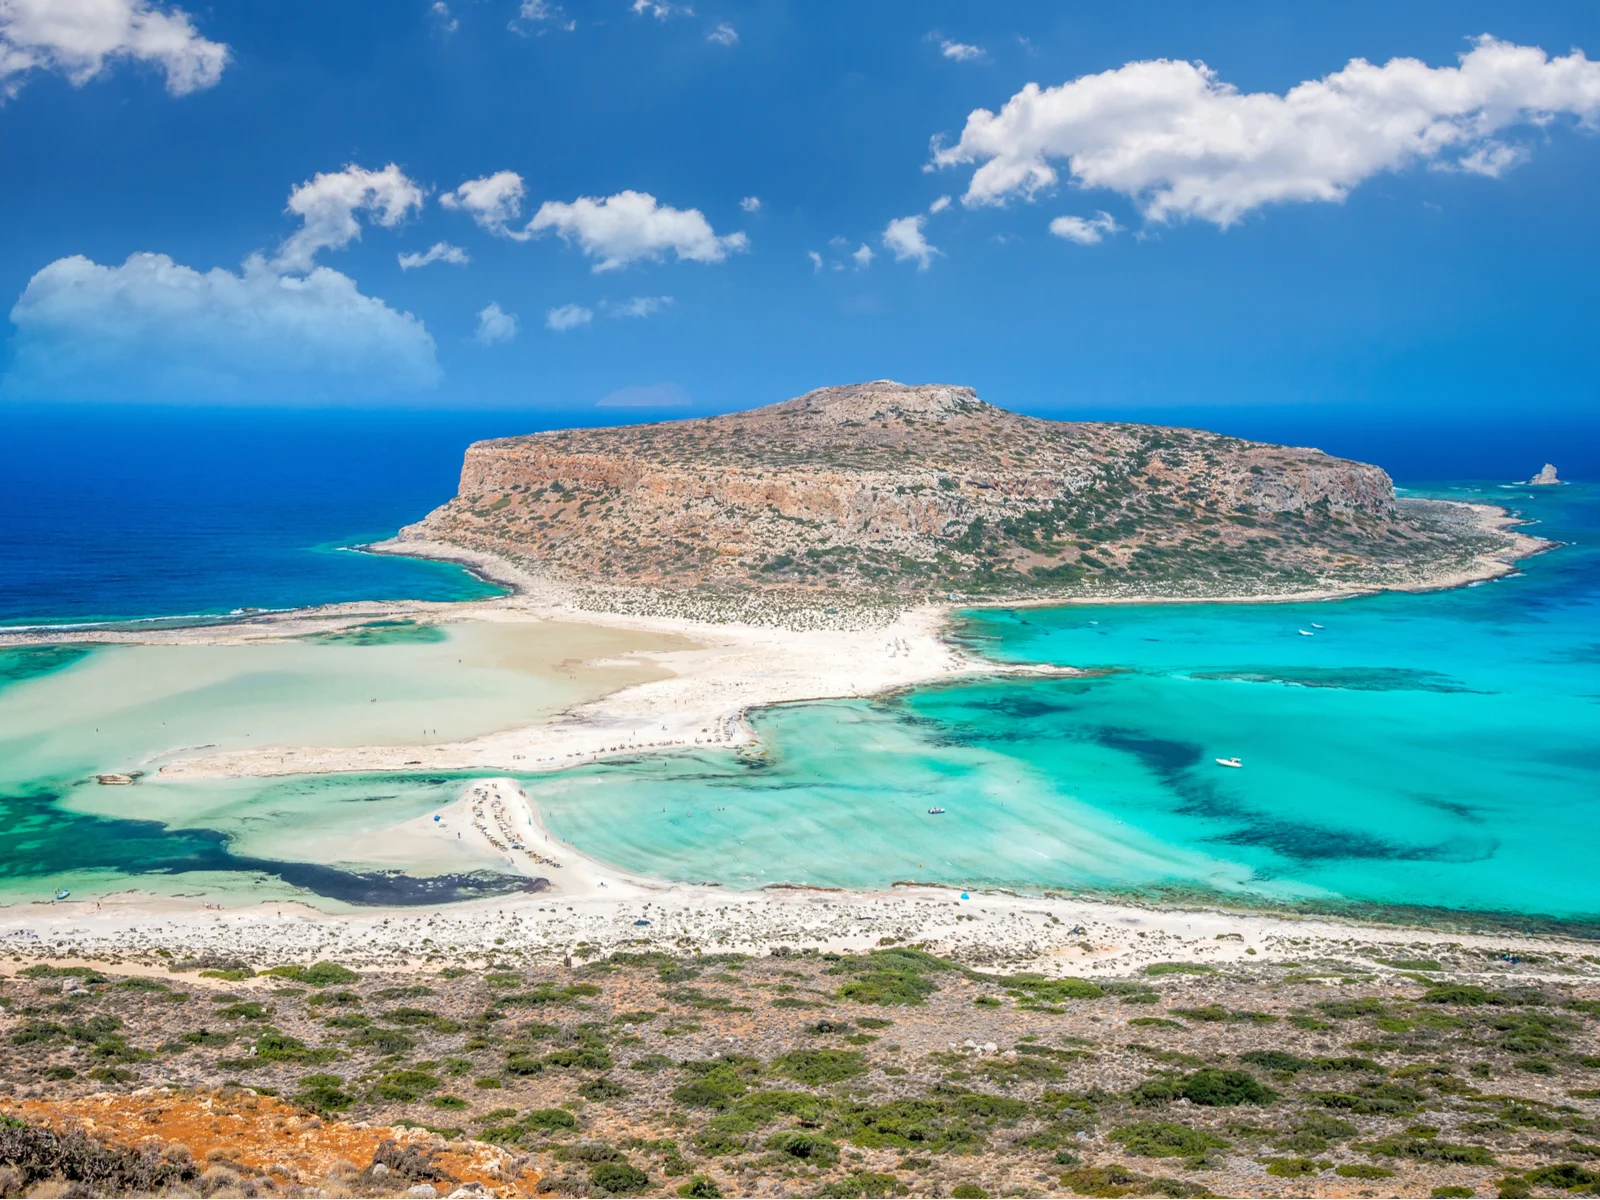 Balos, Crete, one of the best beaches in Greece, as viewed from the air on a sunny day